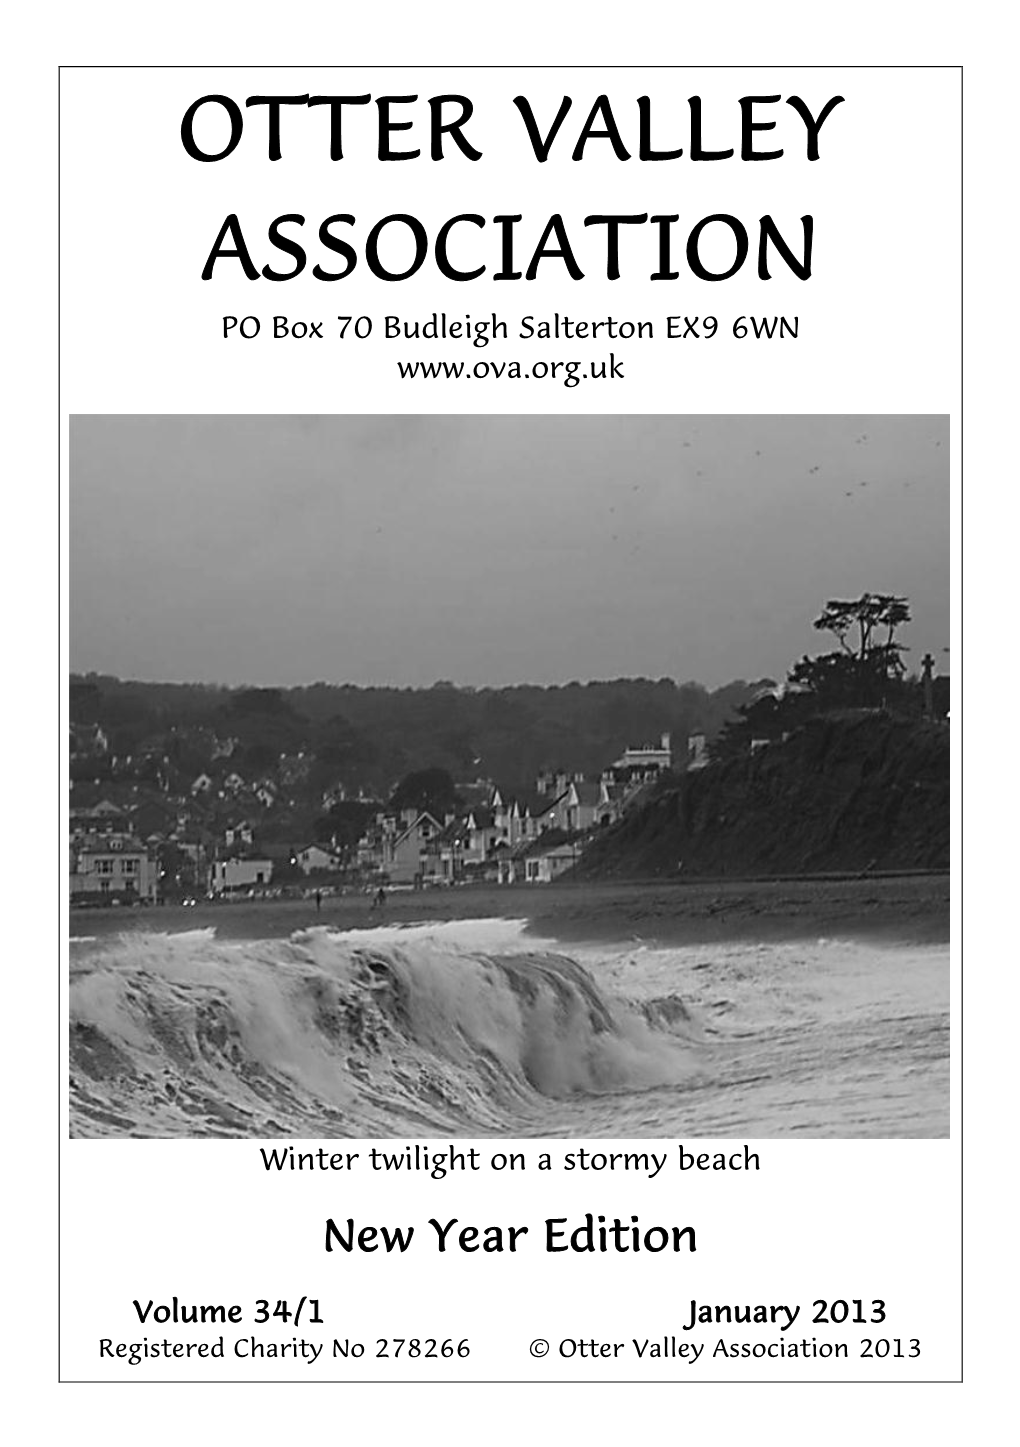 January 2013 Registered Charity No 278266 © Otter Valley Association 2013 Contents Page